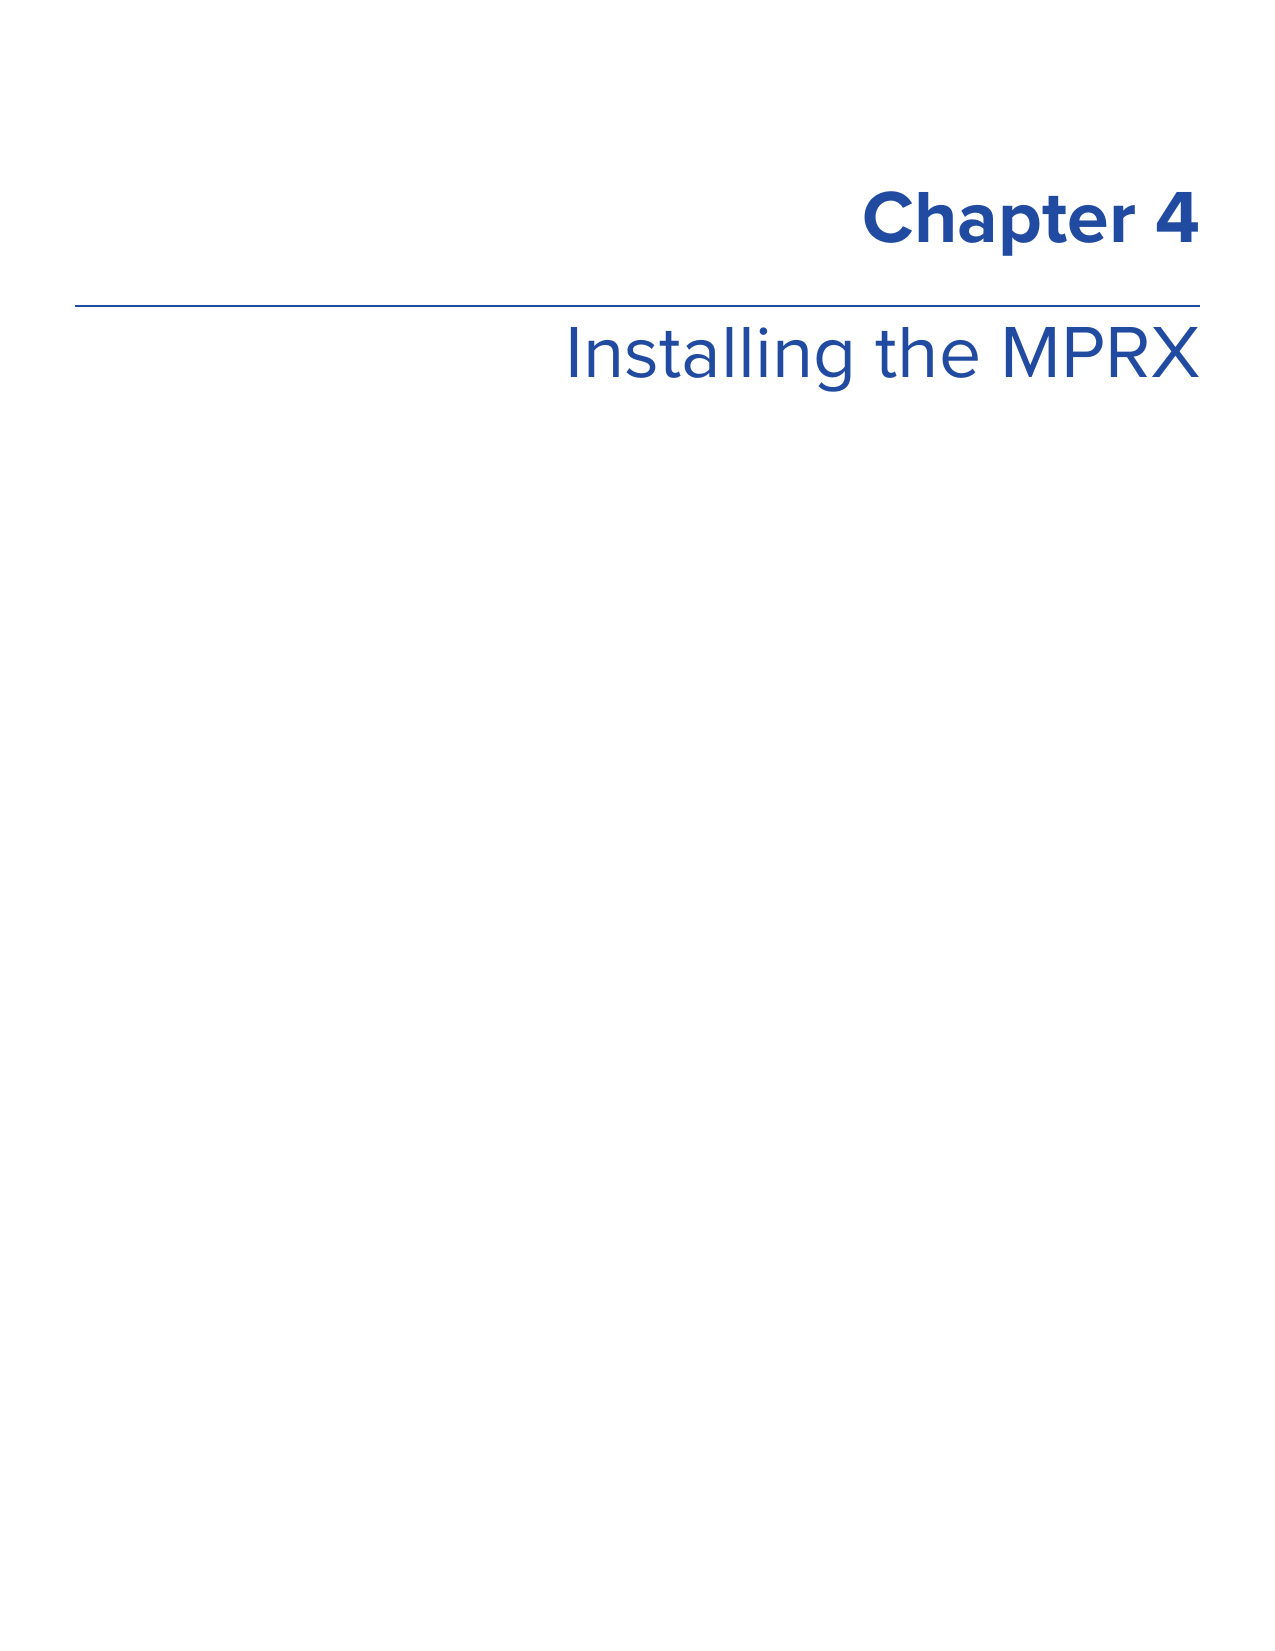 Installing the MPRXChapter 4